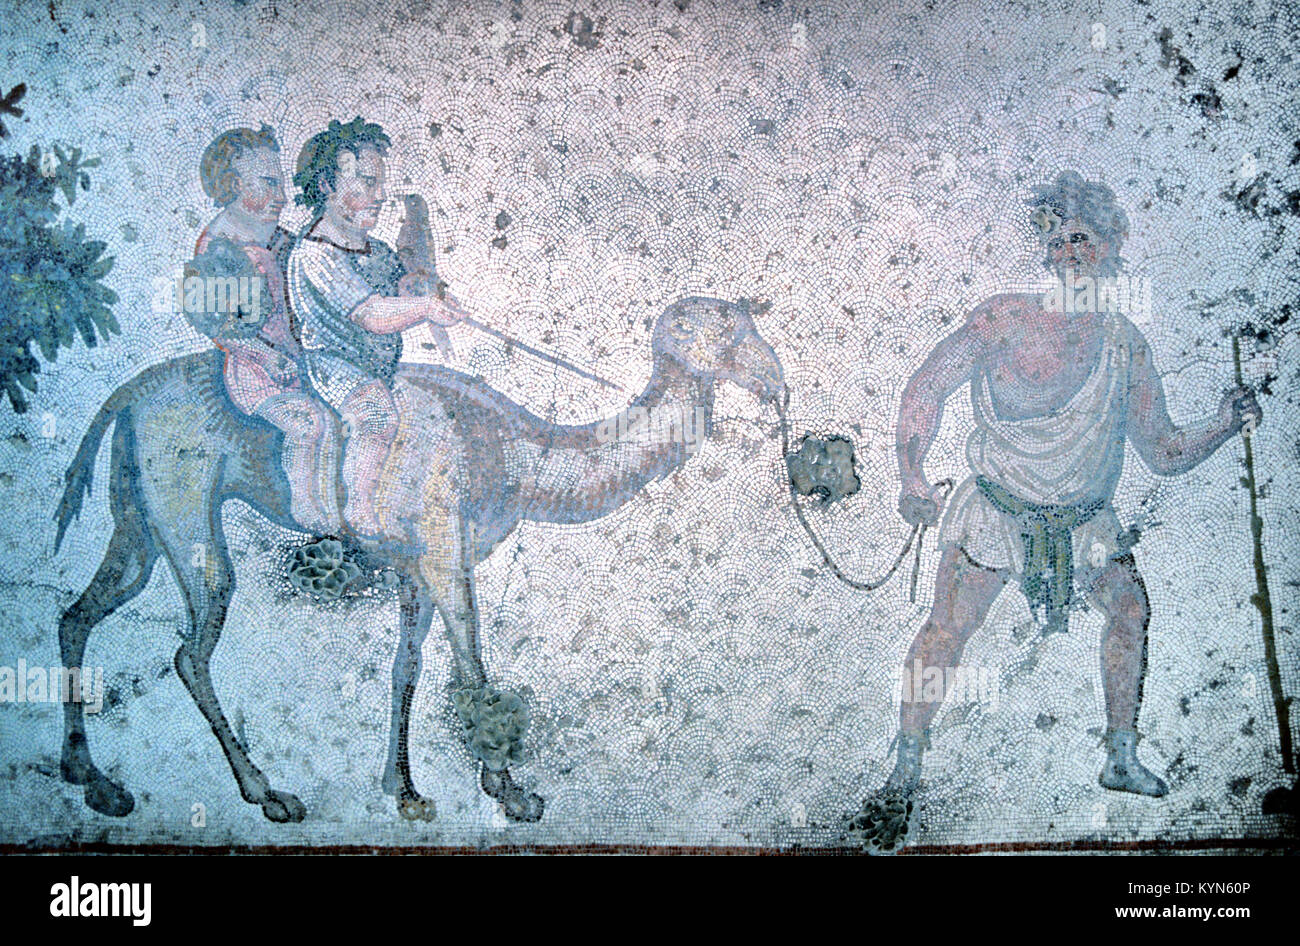 Byzantine Floor Mosaic of Young Boys Riding a Dromedary or Camel and Cameleer from the Great Palace of Byzantium, Istanbul, Turkey Stock Photo